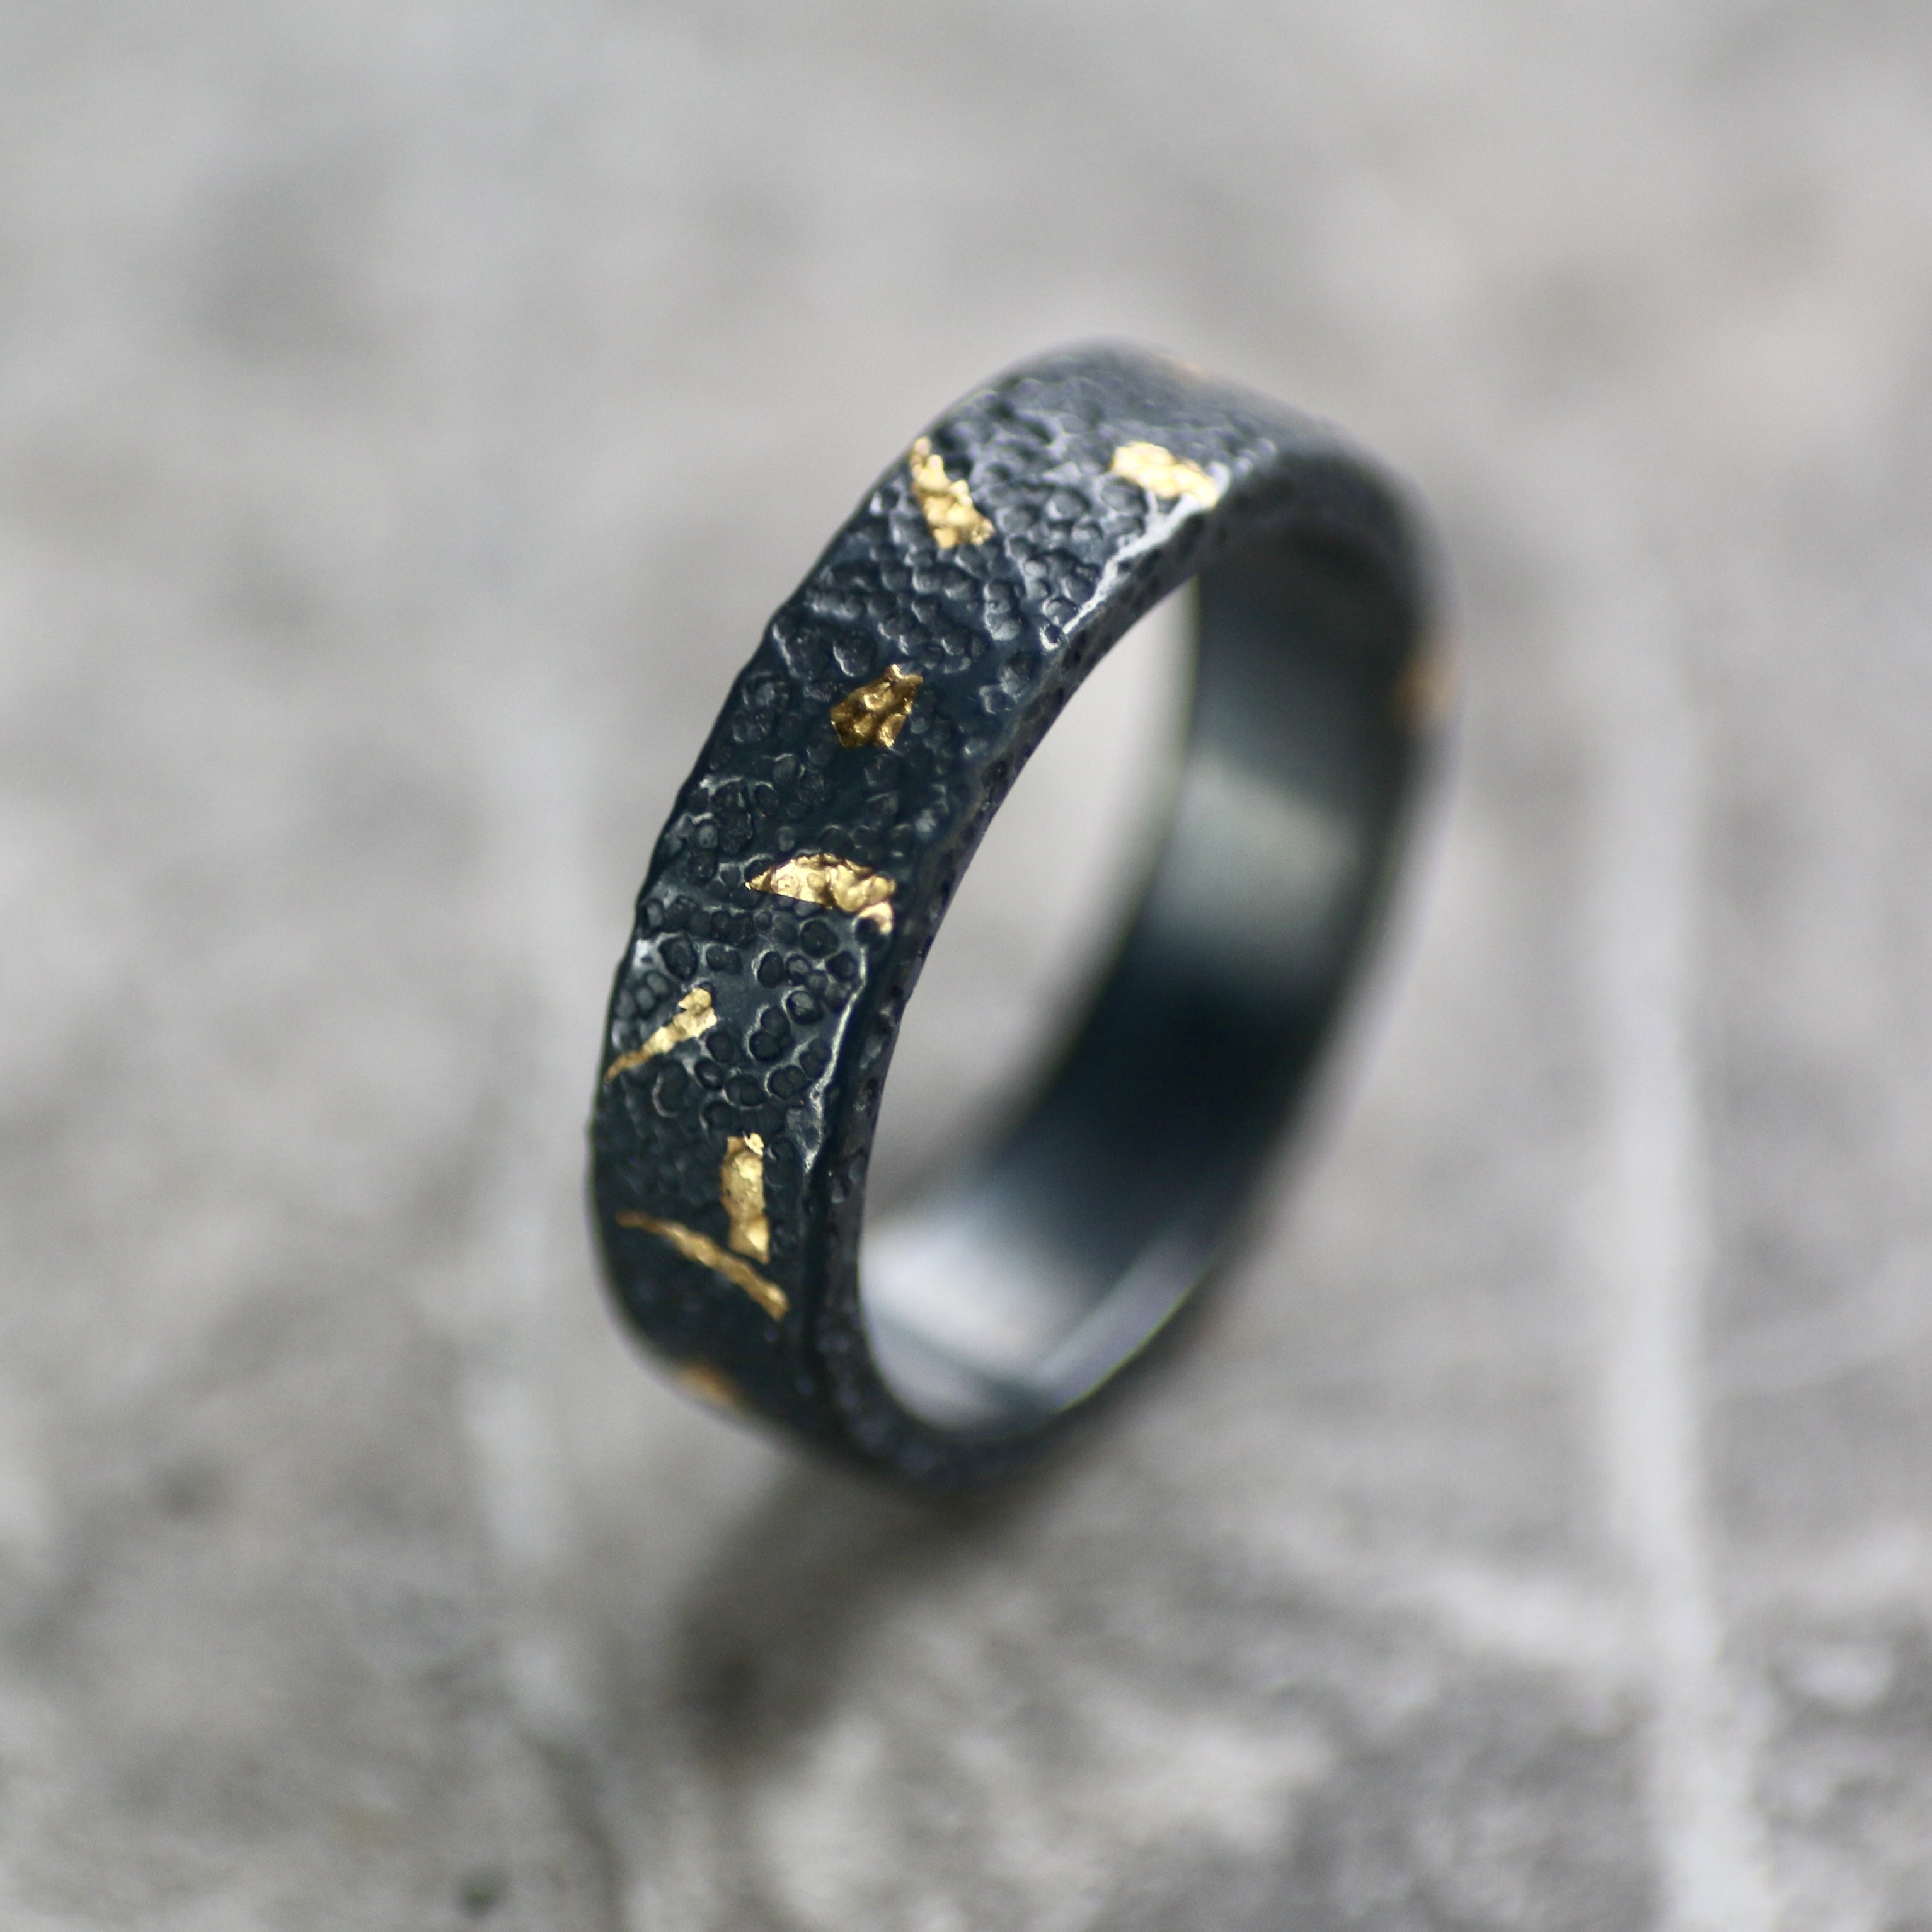 Oxidised Silver Dot Texture Keum Boo Ring - Handmade in Britain